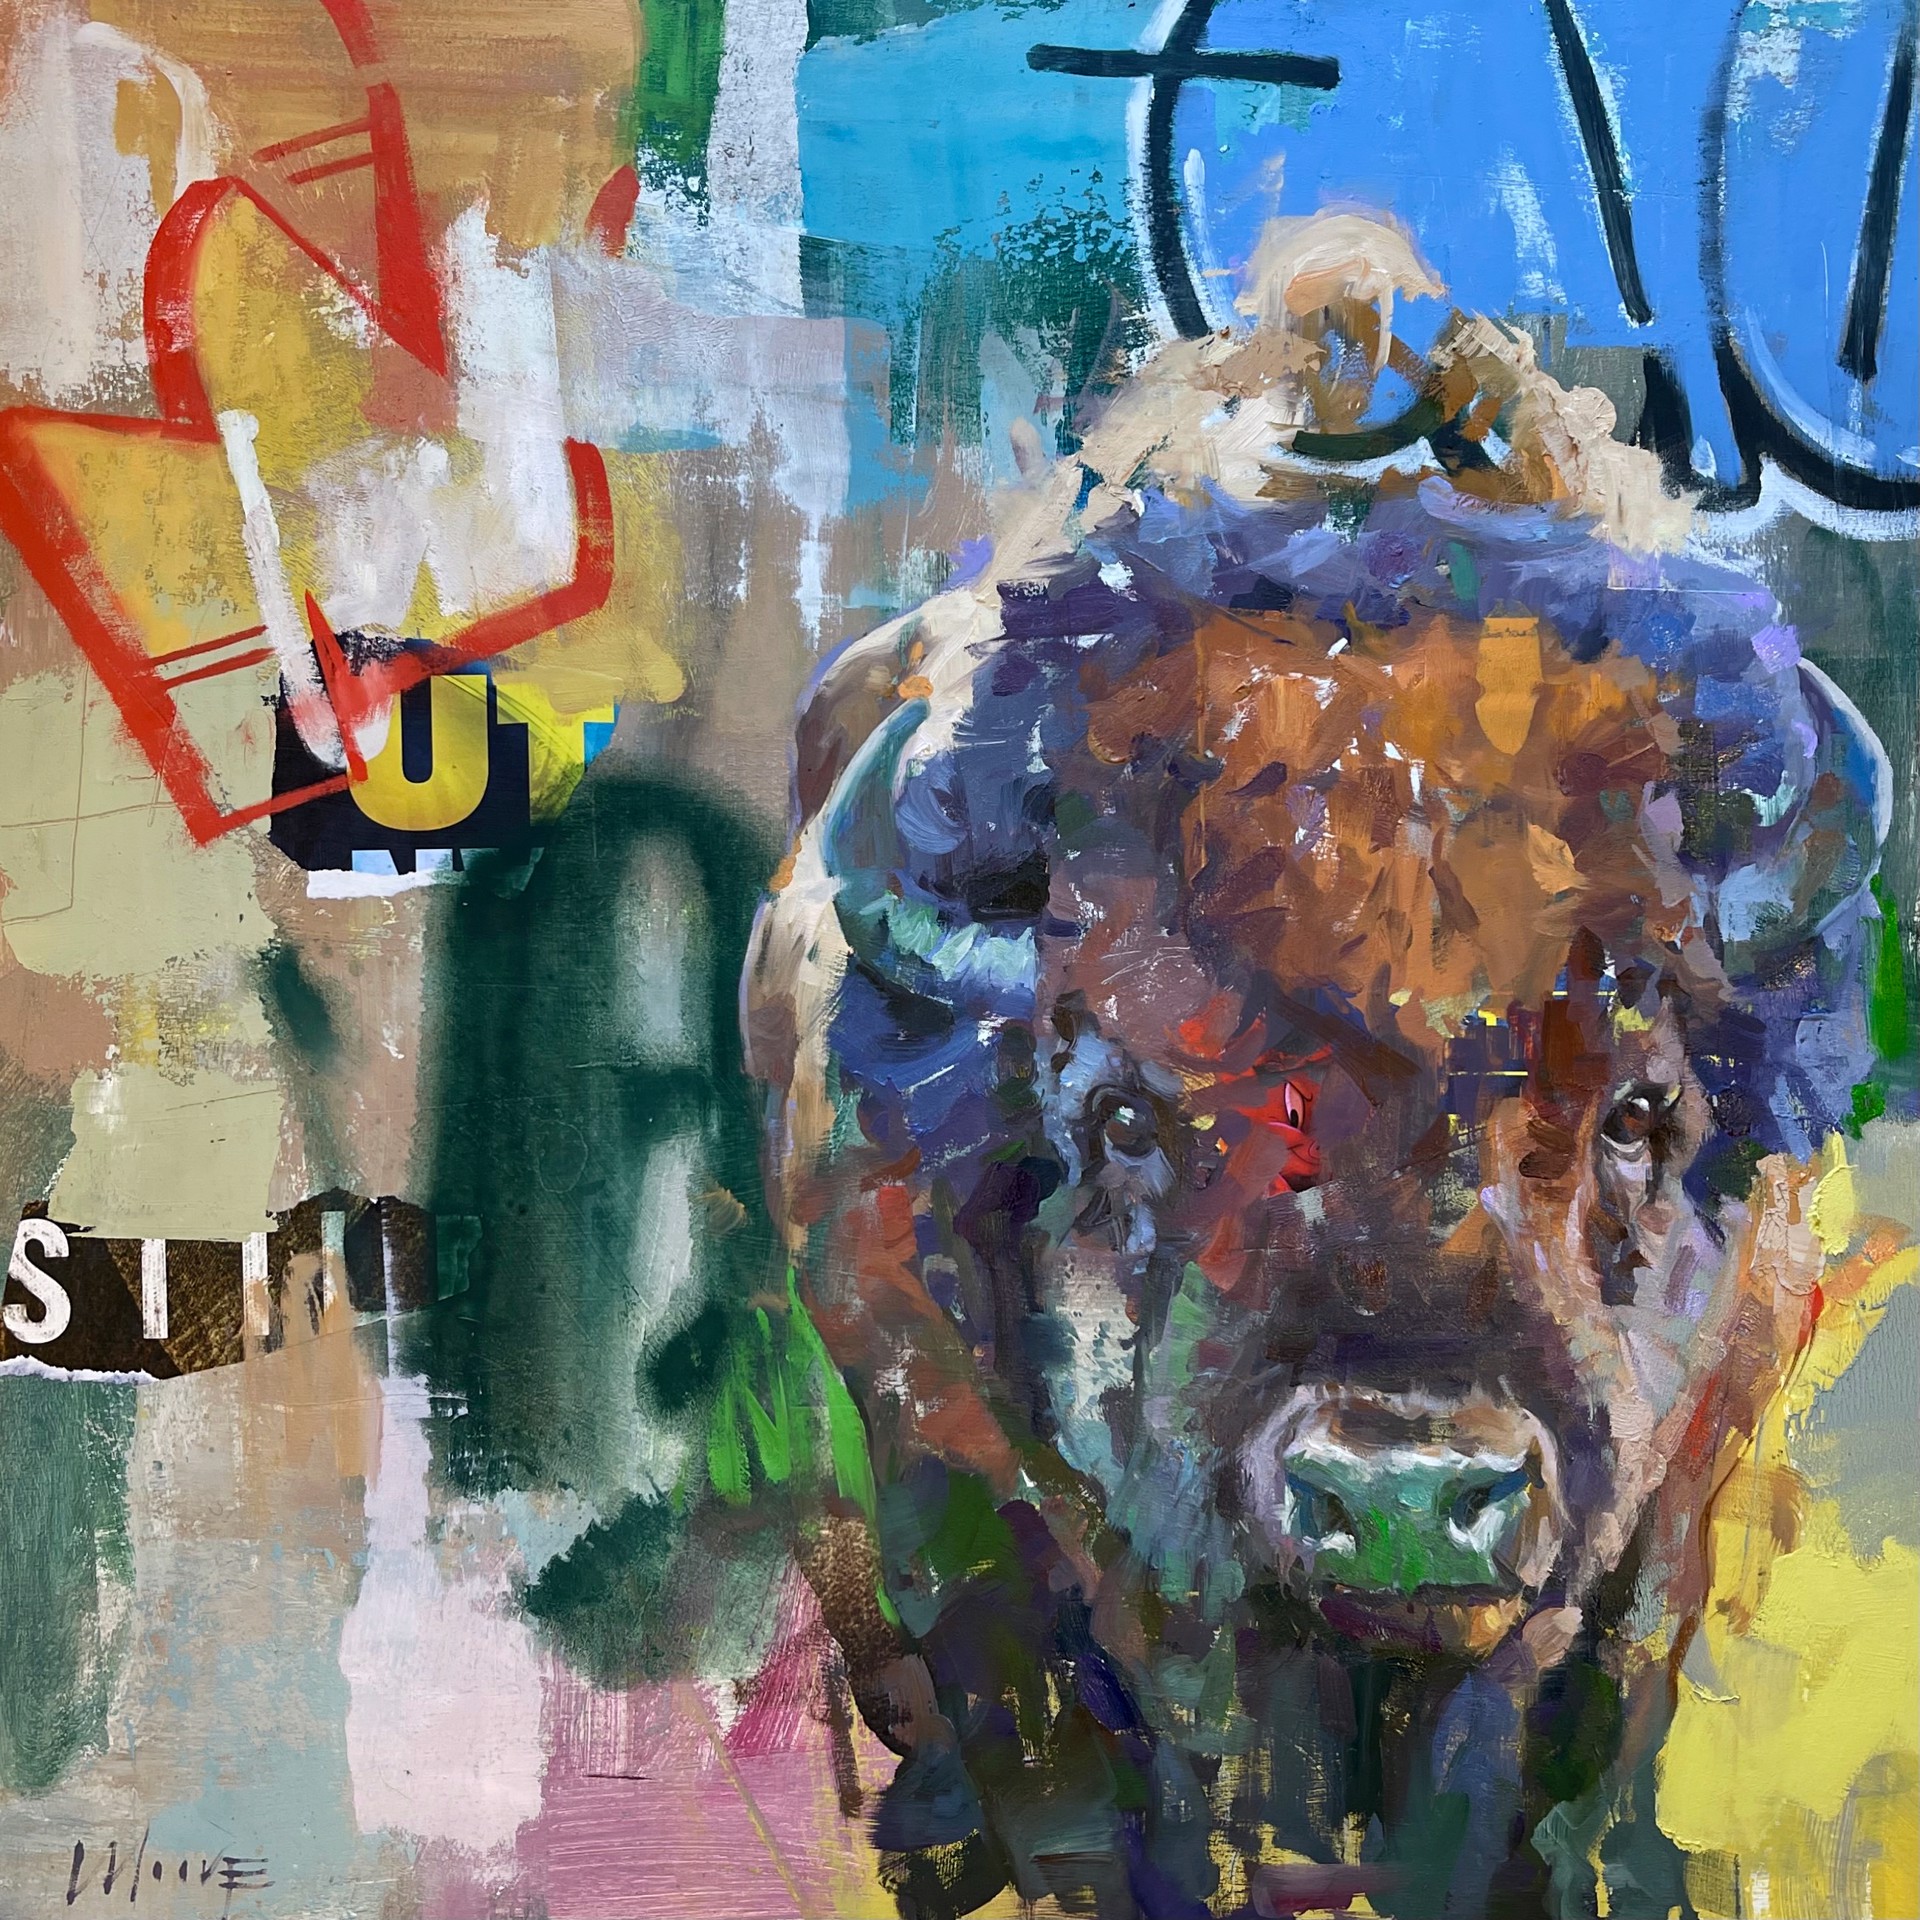 Contemporary-Original-Oil-Painting-Featuring-Bison-And-Graffiti